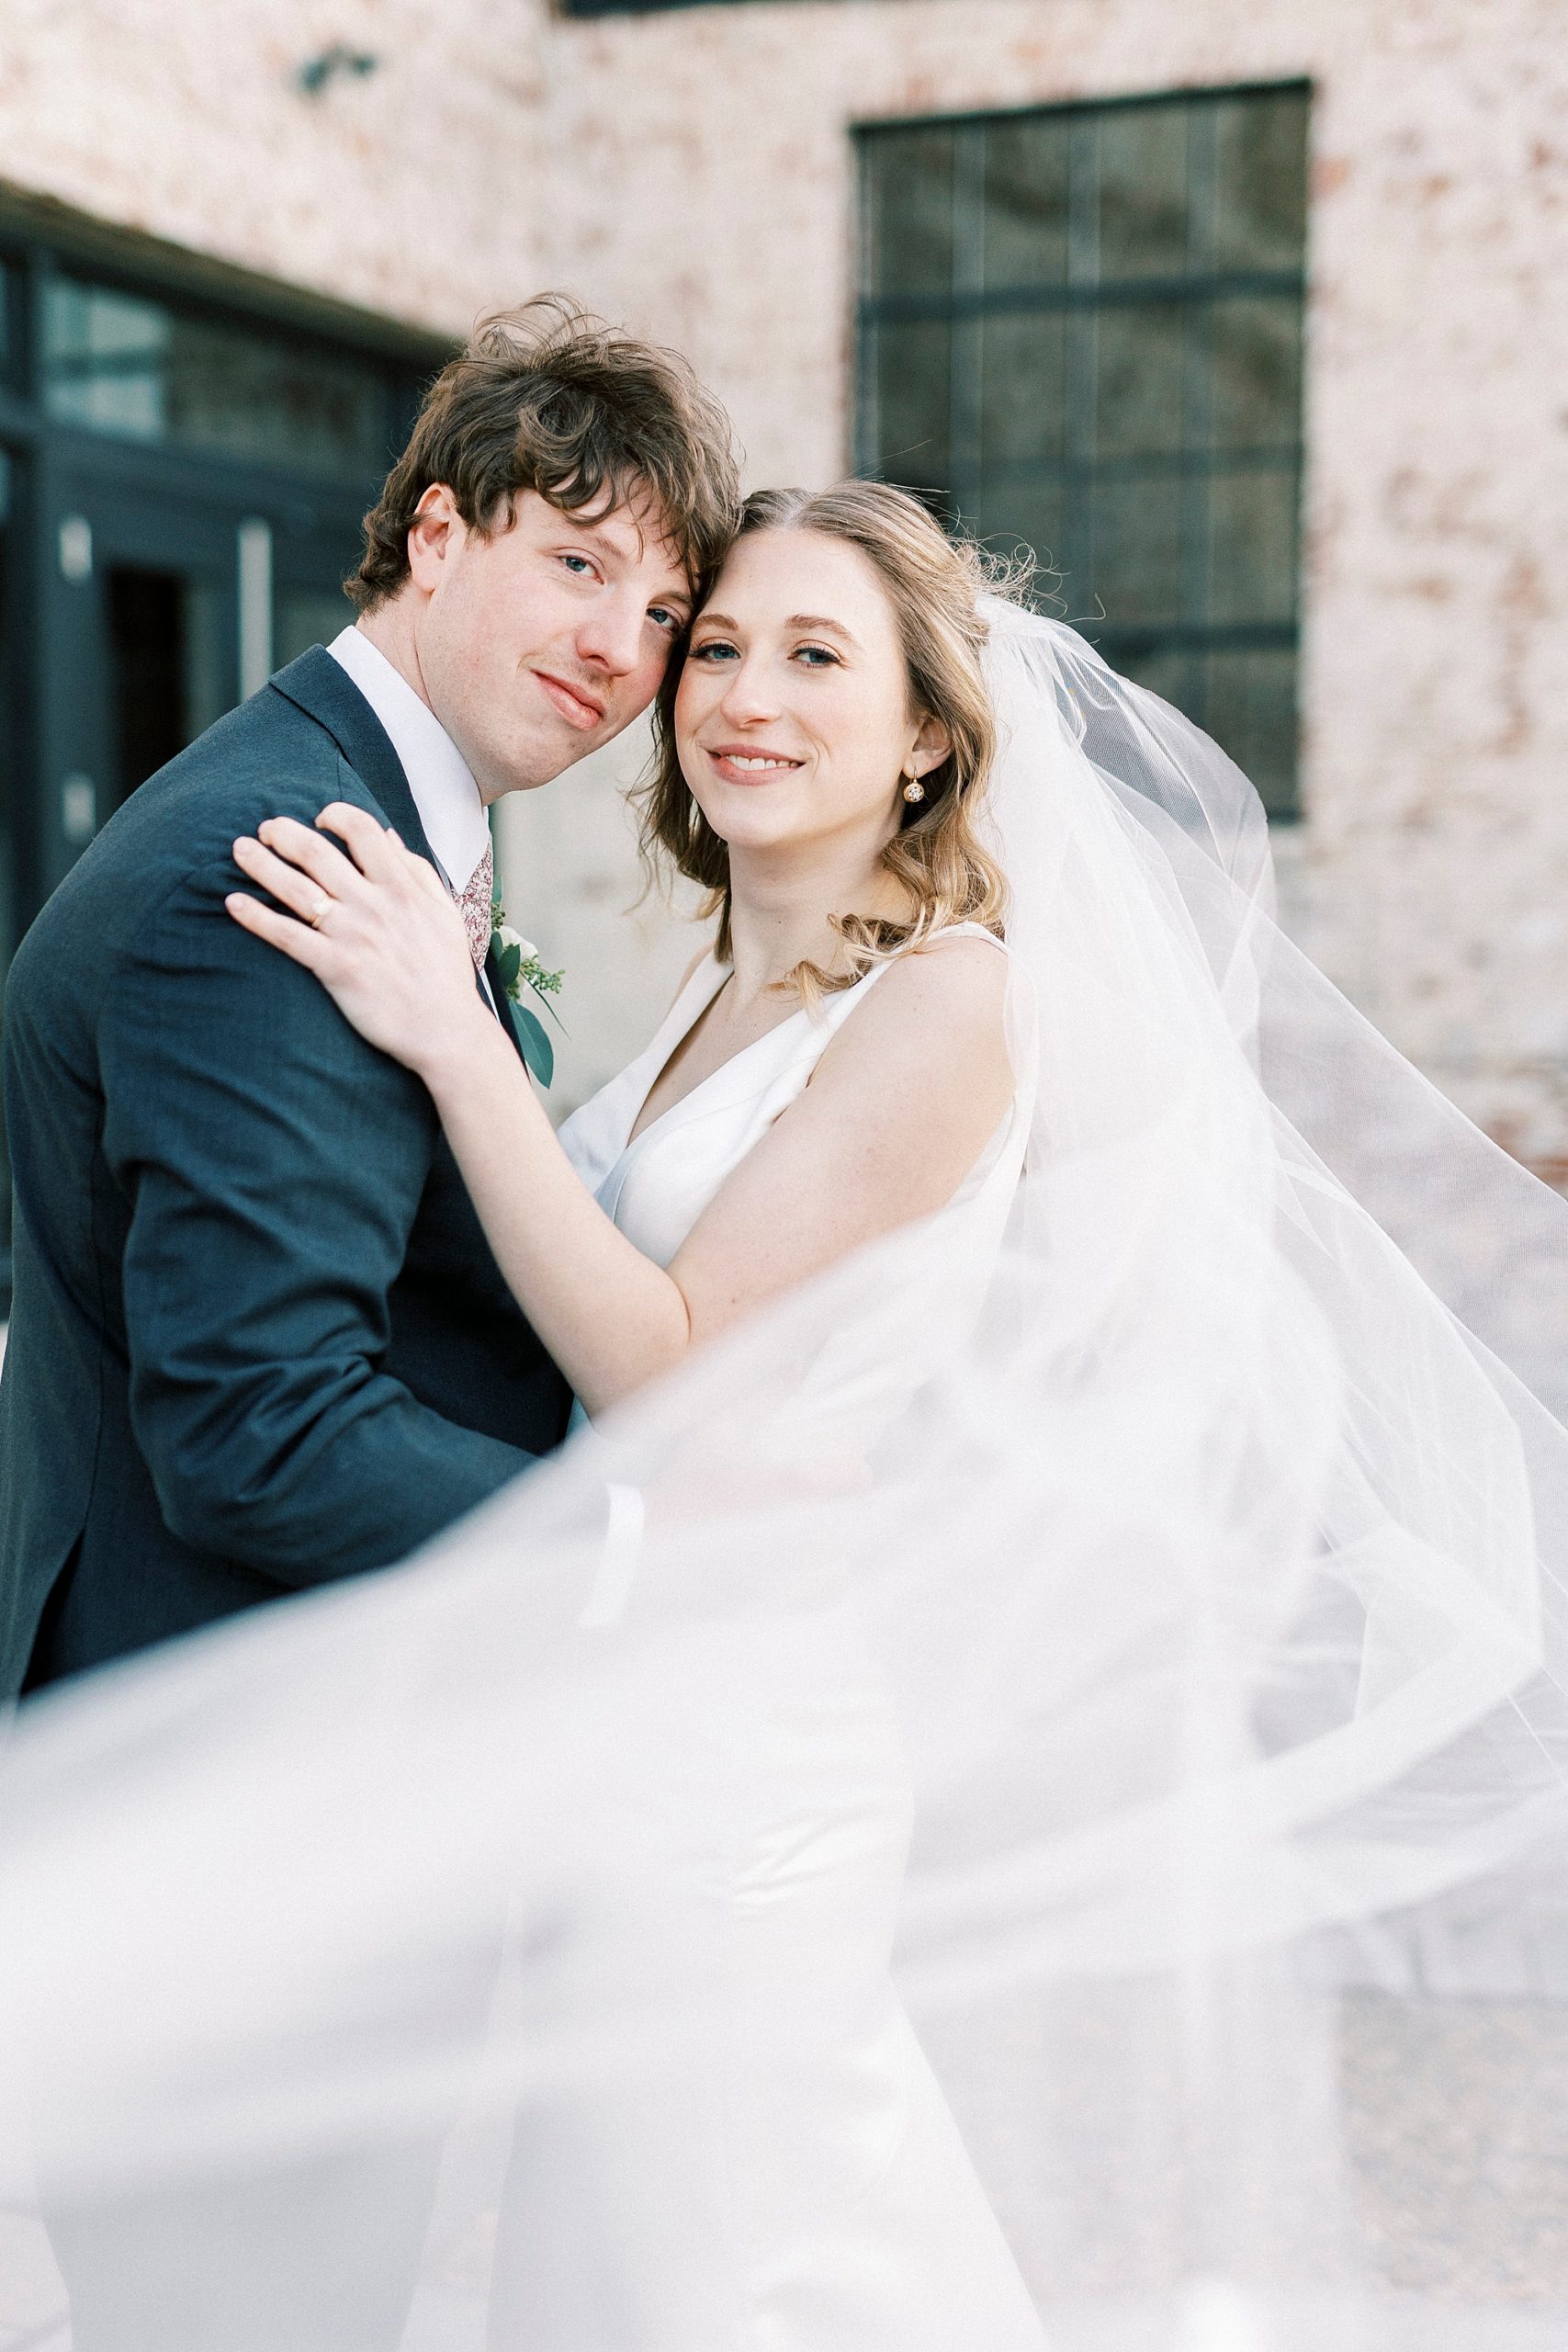 newlyweds lean heads together with veil around them at the Cadillac Service Garage